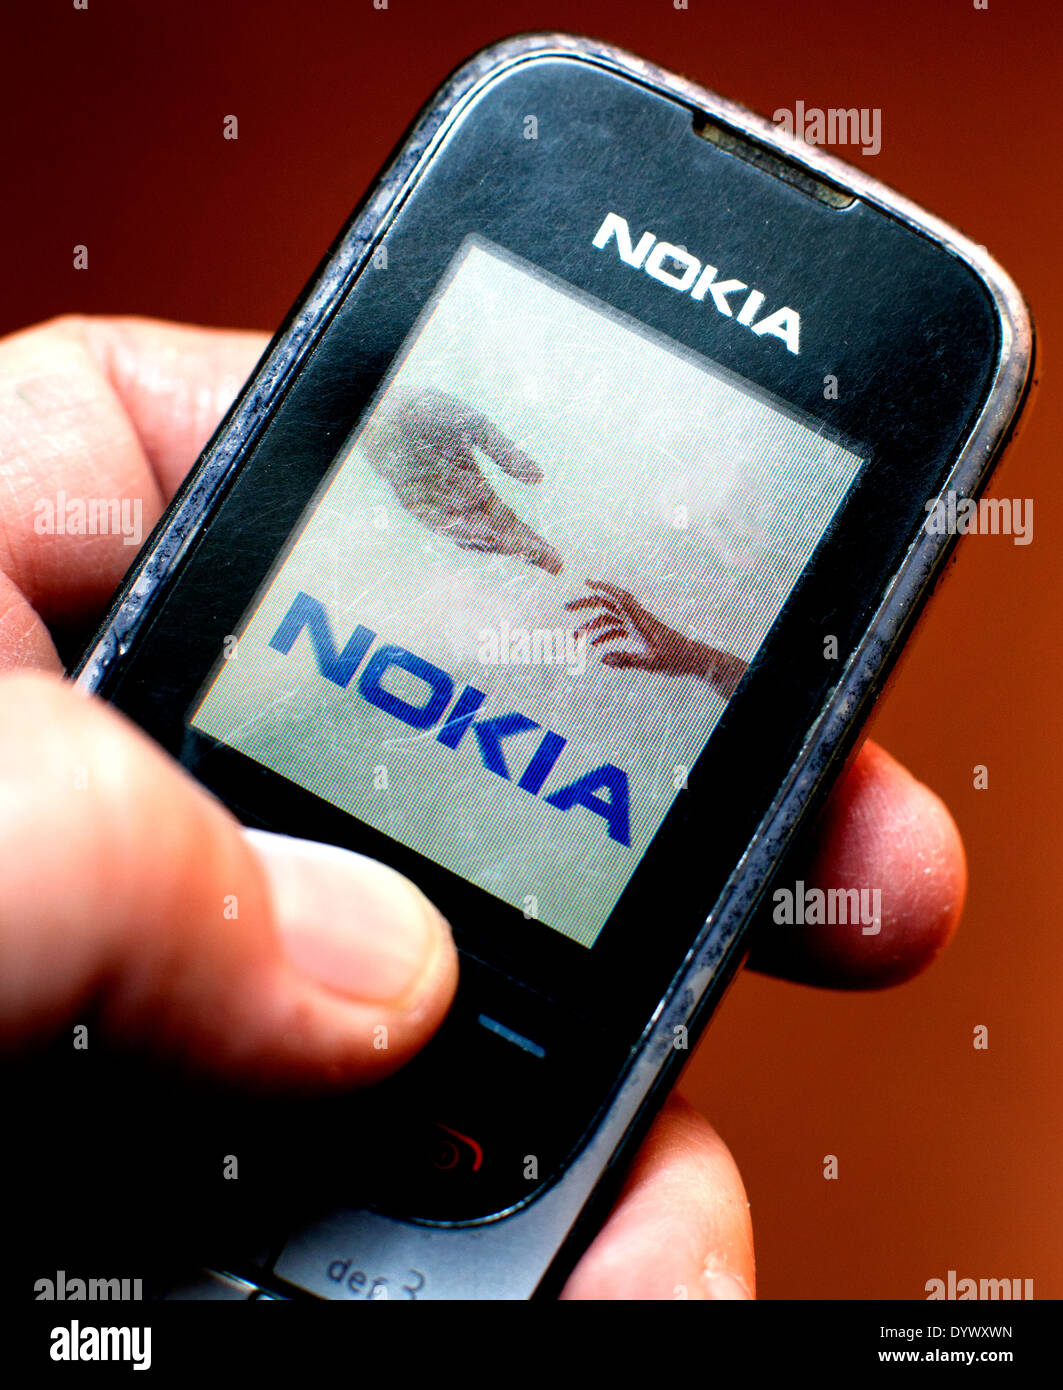 Nokia mobile phones expected to cease production, London Stock Photo